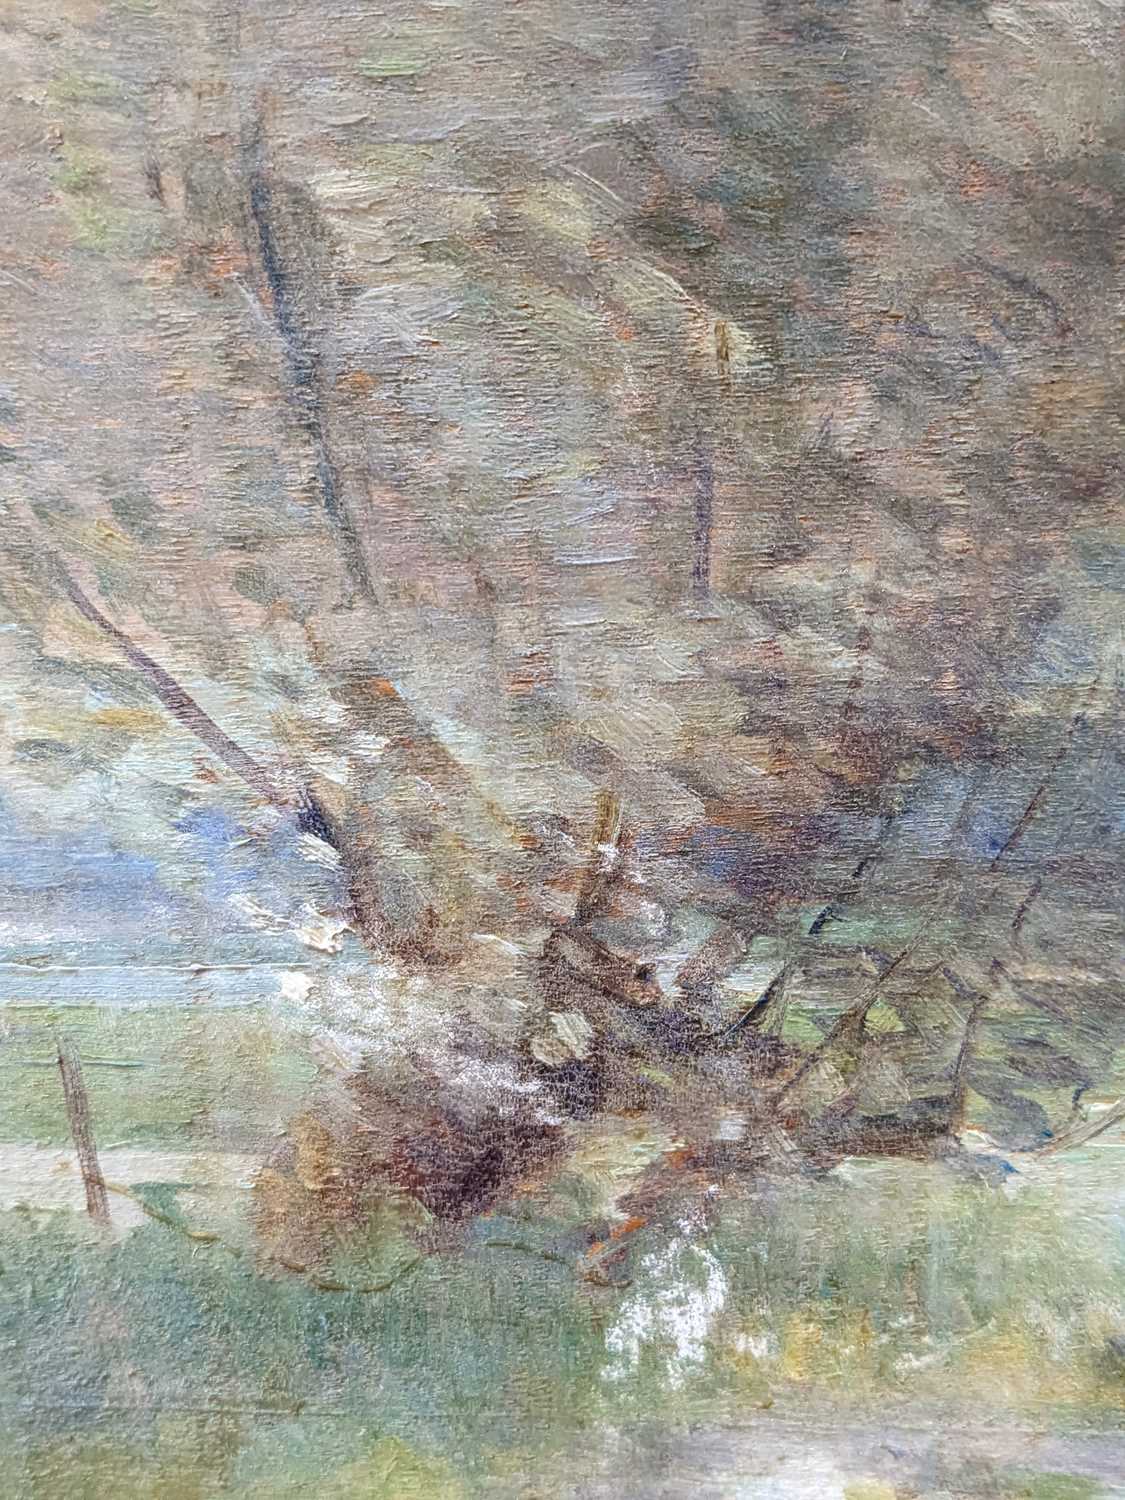 TENG-HIOK CHIU 周廷旭 (Chou Ting-Hsu) (Chinese, 1903-1972) oil on board - Landscape with tree and - Image 3 of 6